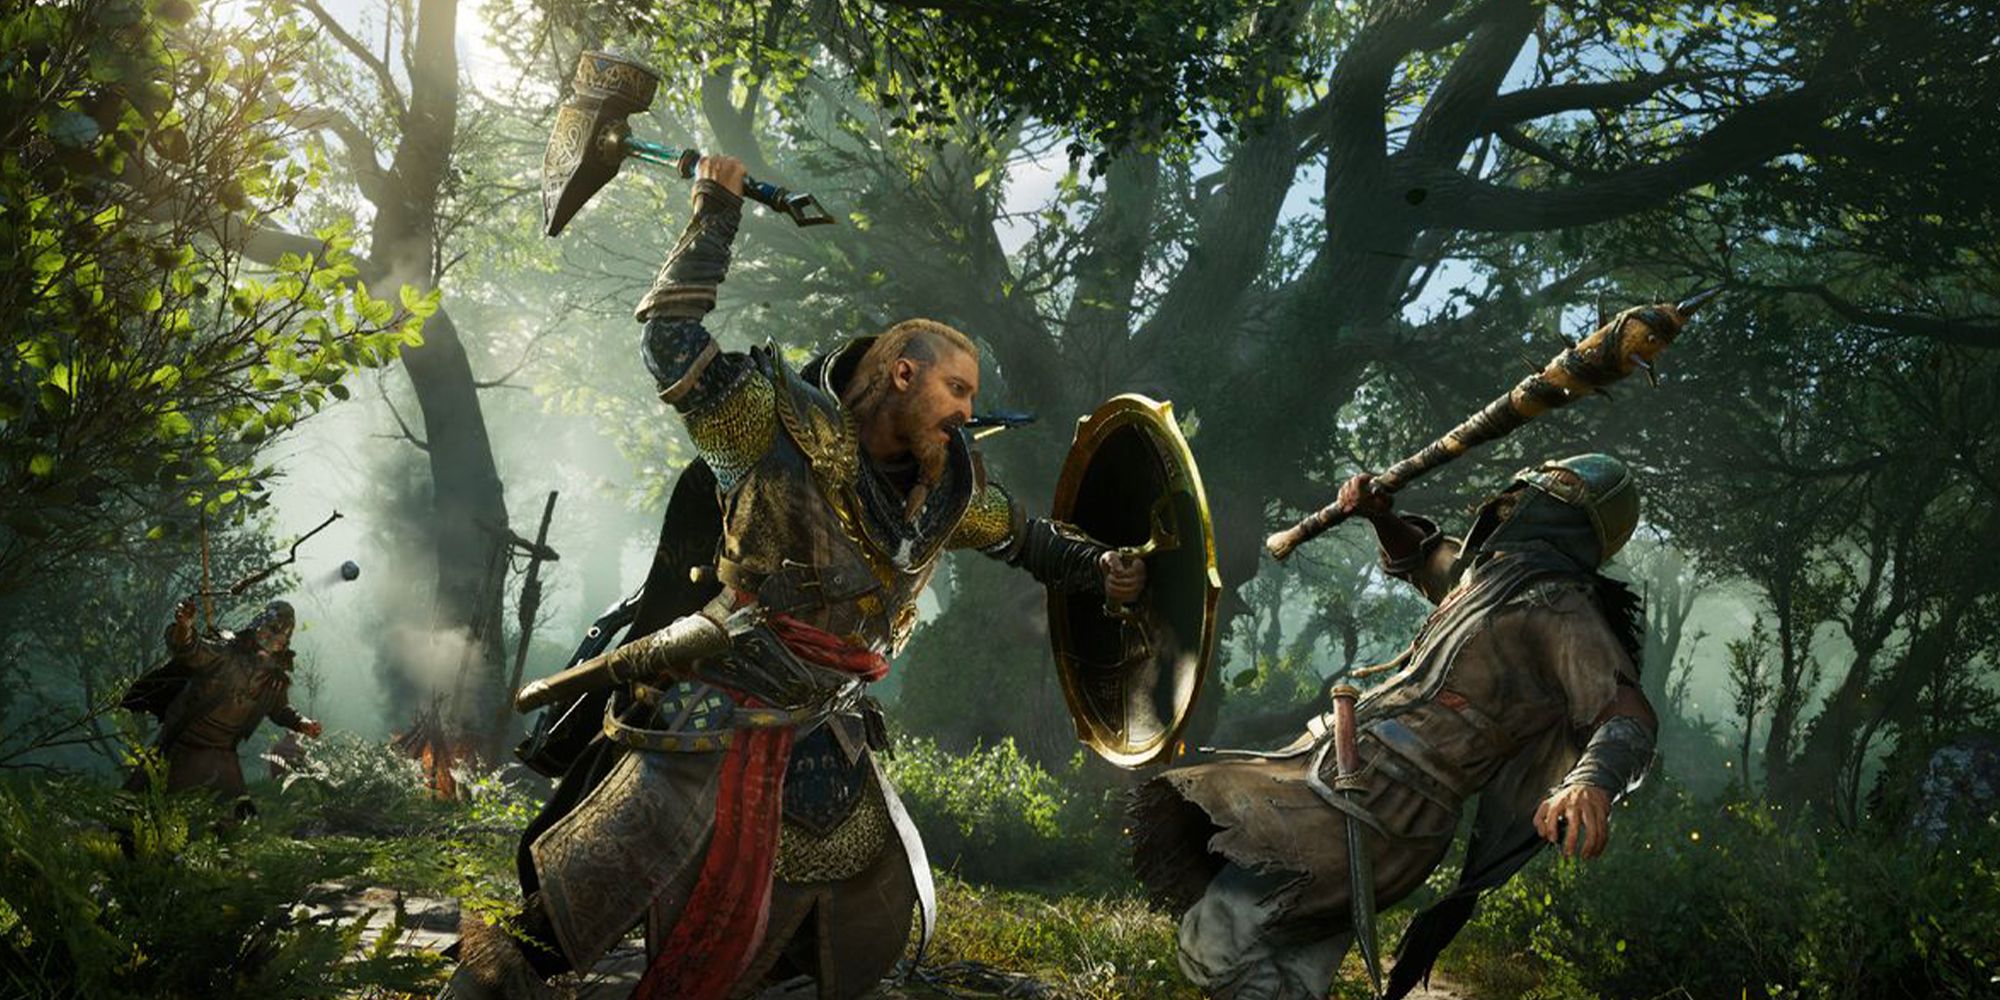 How to Unlock More Abilities in Assassin’s Creed Valhalla